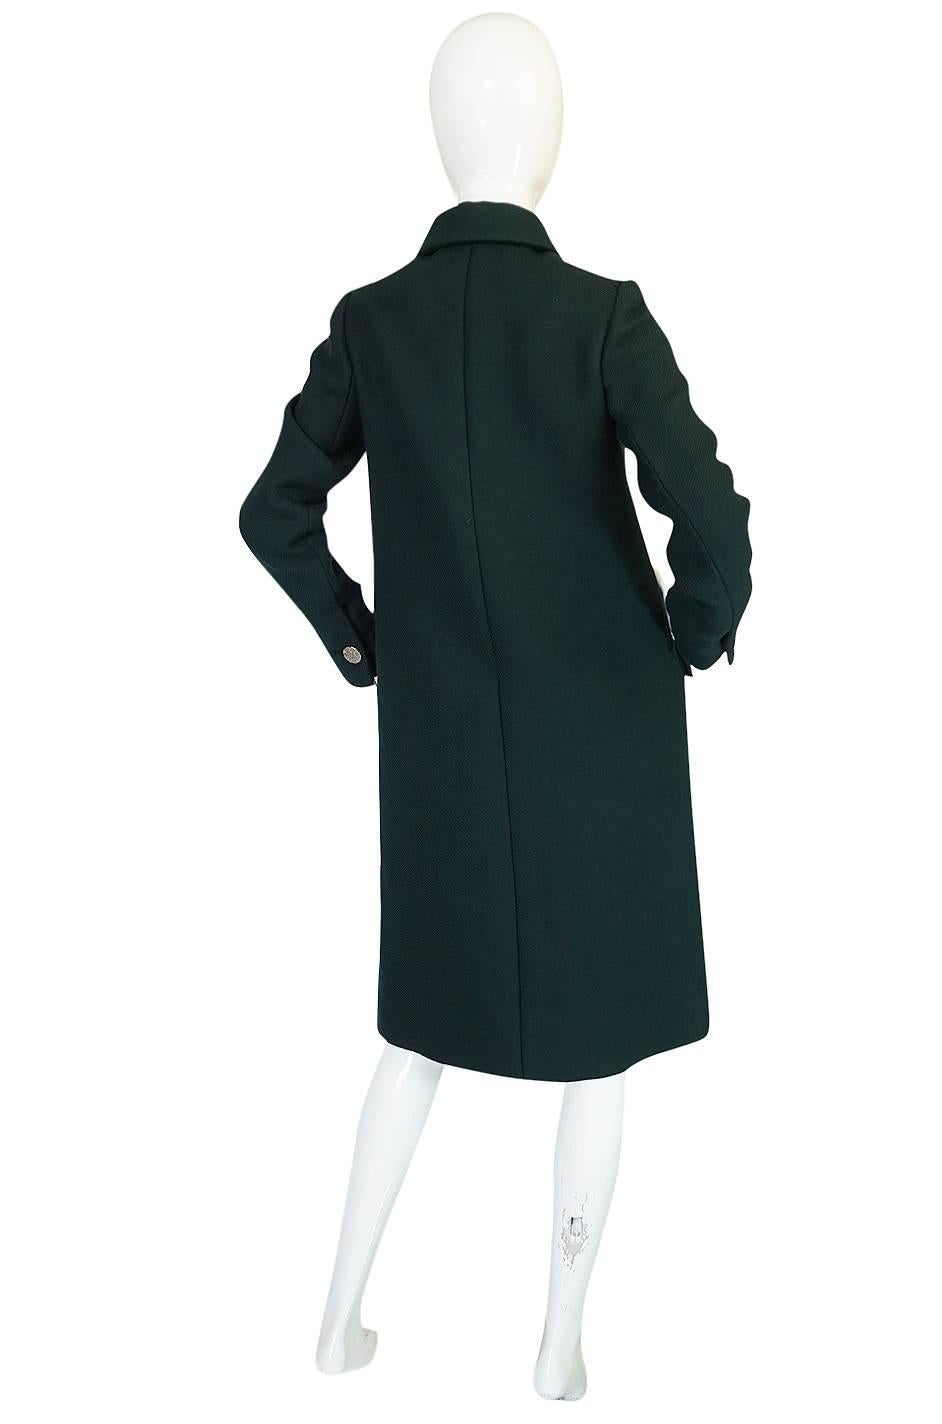 The color is the first thing that catches your eye. In a sea fo black vintage coats this deep green hue is a refreshing change. The double row of textured silver buttons that run down the coat and give it that fantastic military feel are the next